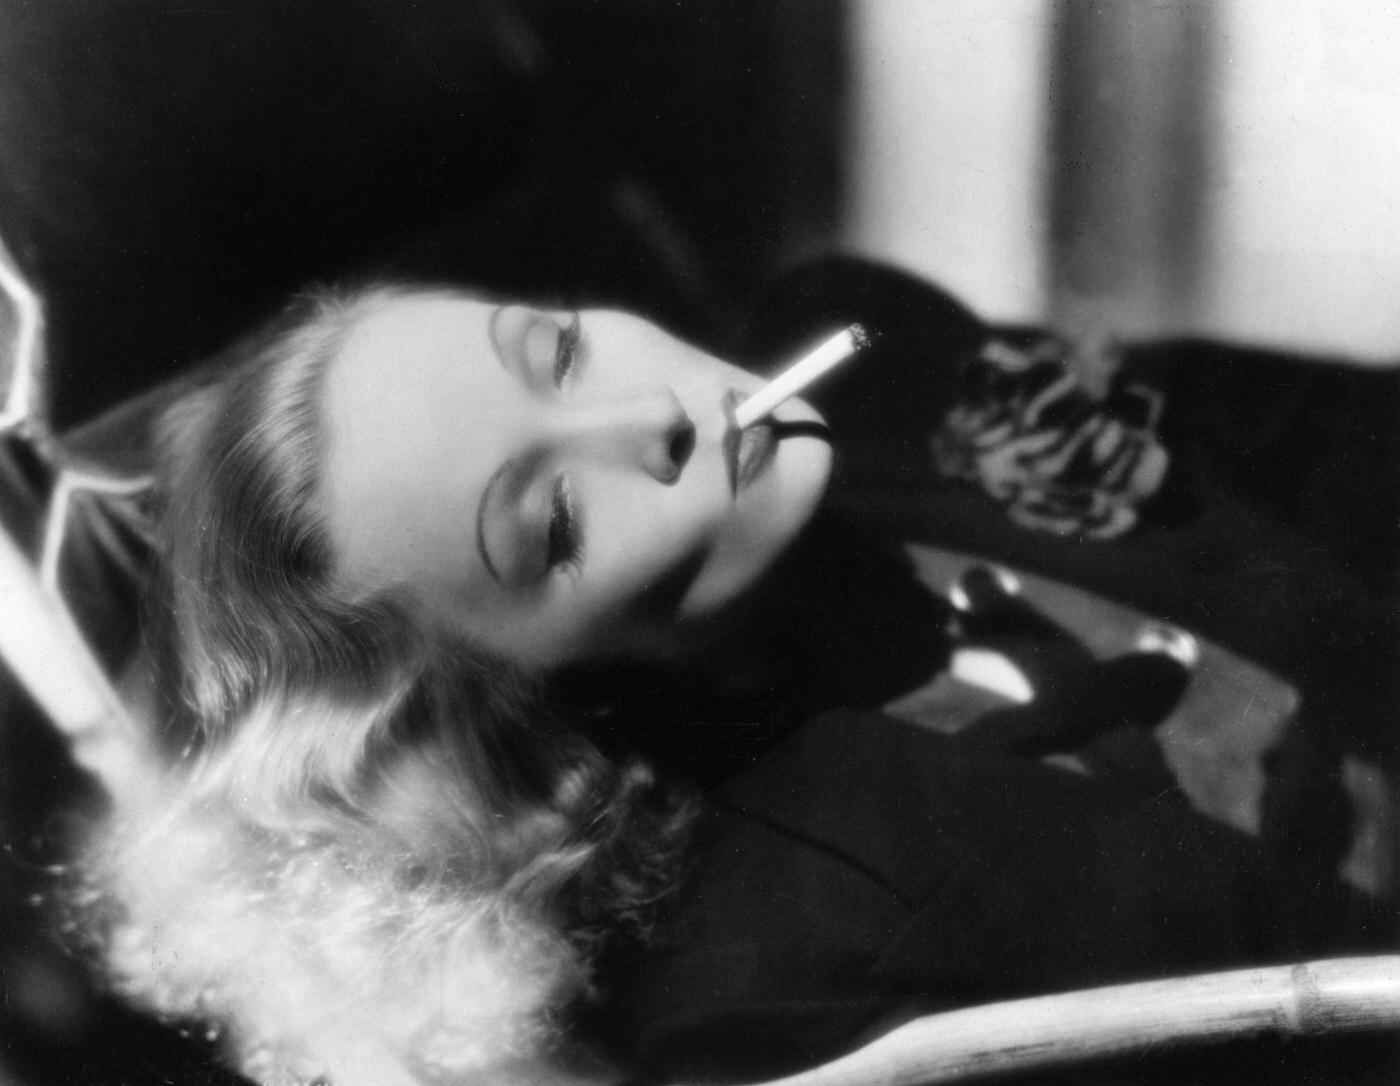 Marlene Dietrich epitomizes screen sensuality in this photograph.